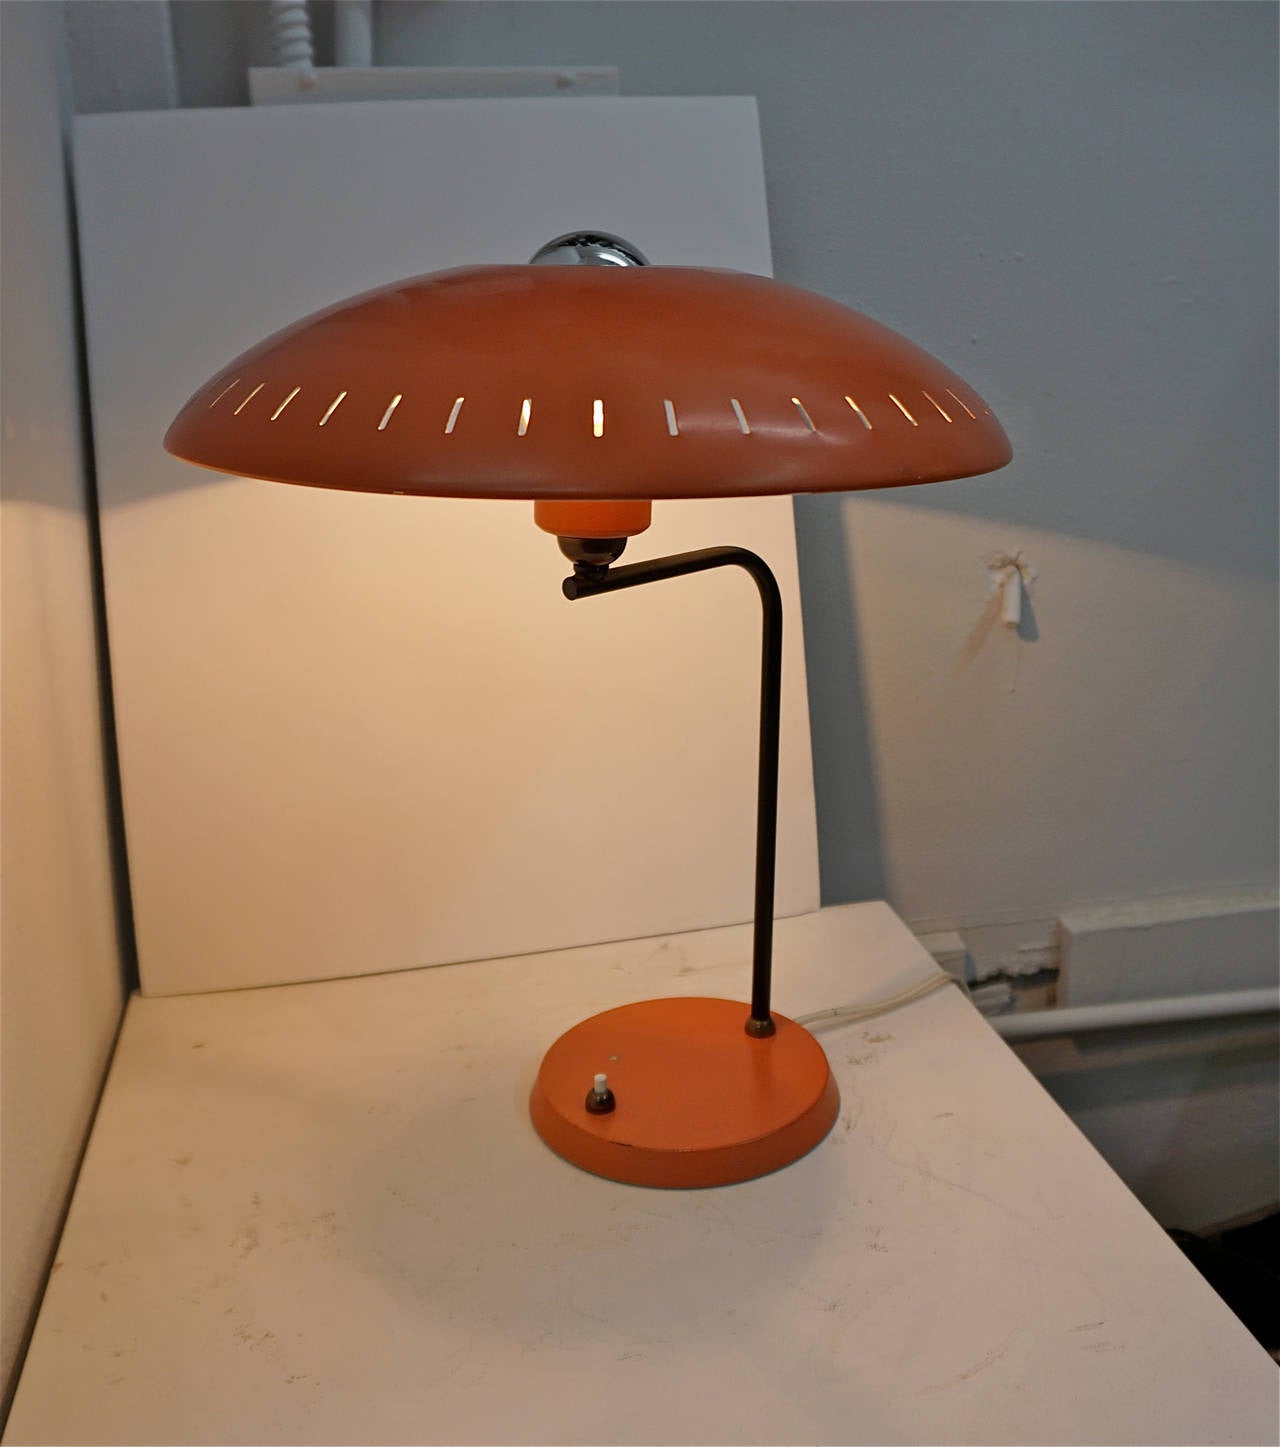 Designed in the 1960s by Kalff for Phillips, Holland.
Salmon colored shad and base with push button on/off switch.